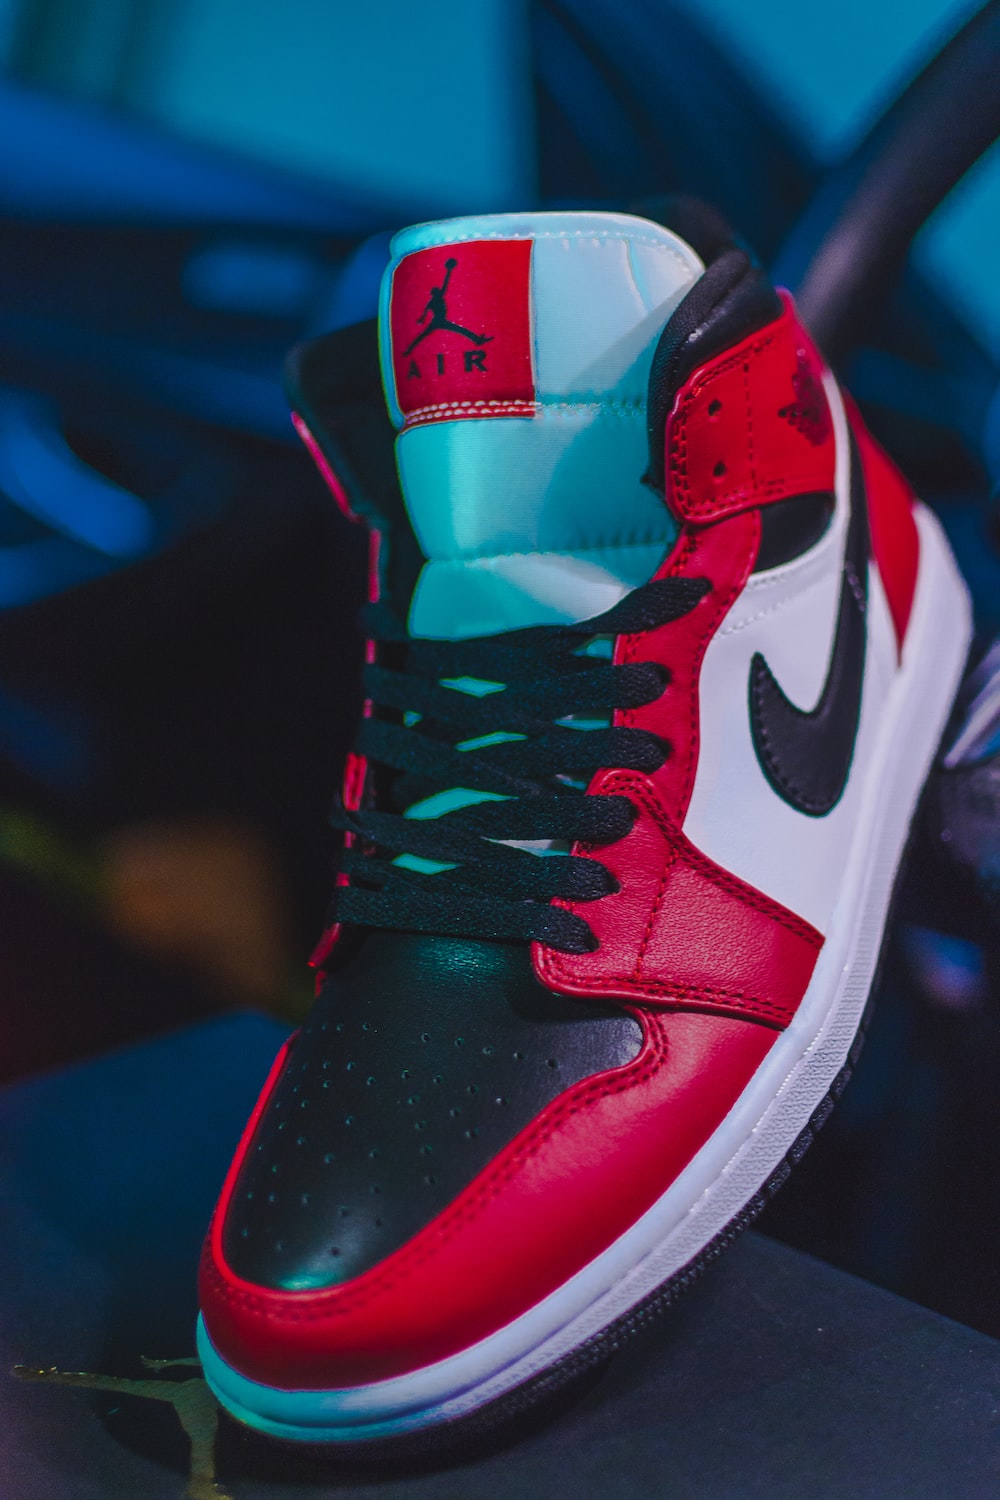 500 Nike Jordan Pictures [HD] Download Free Images on